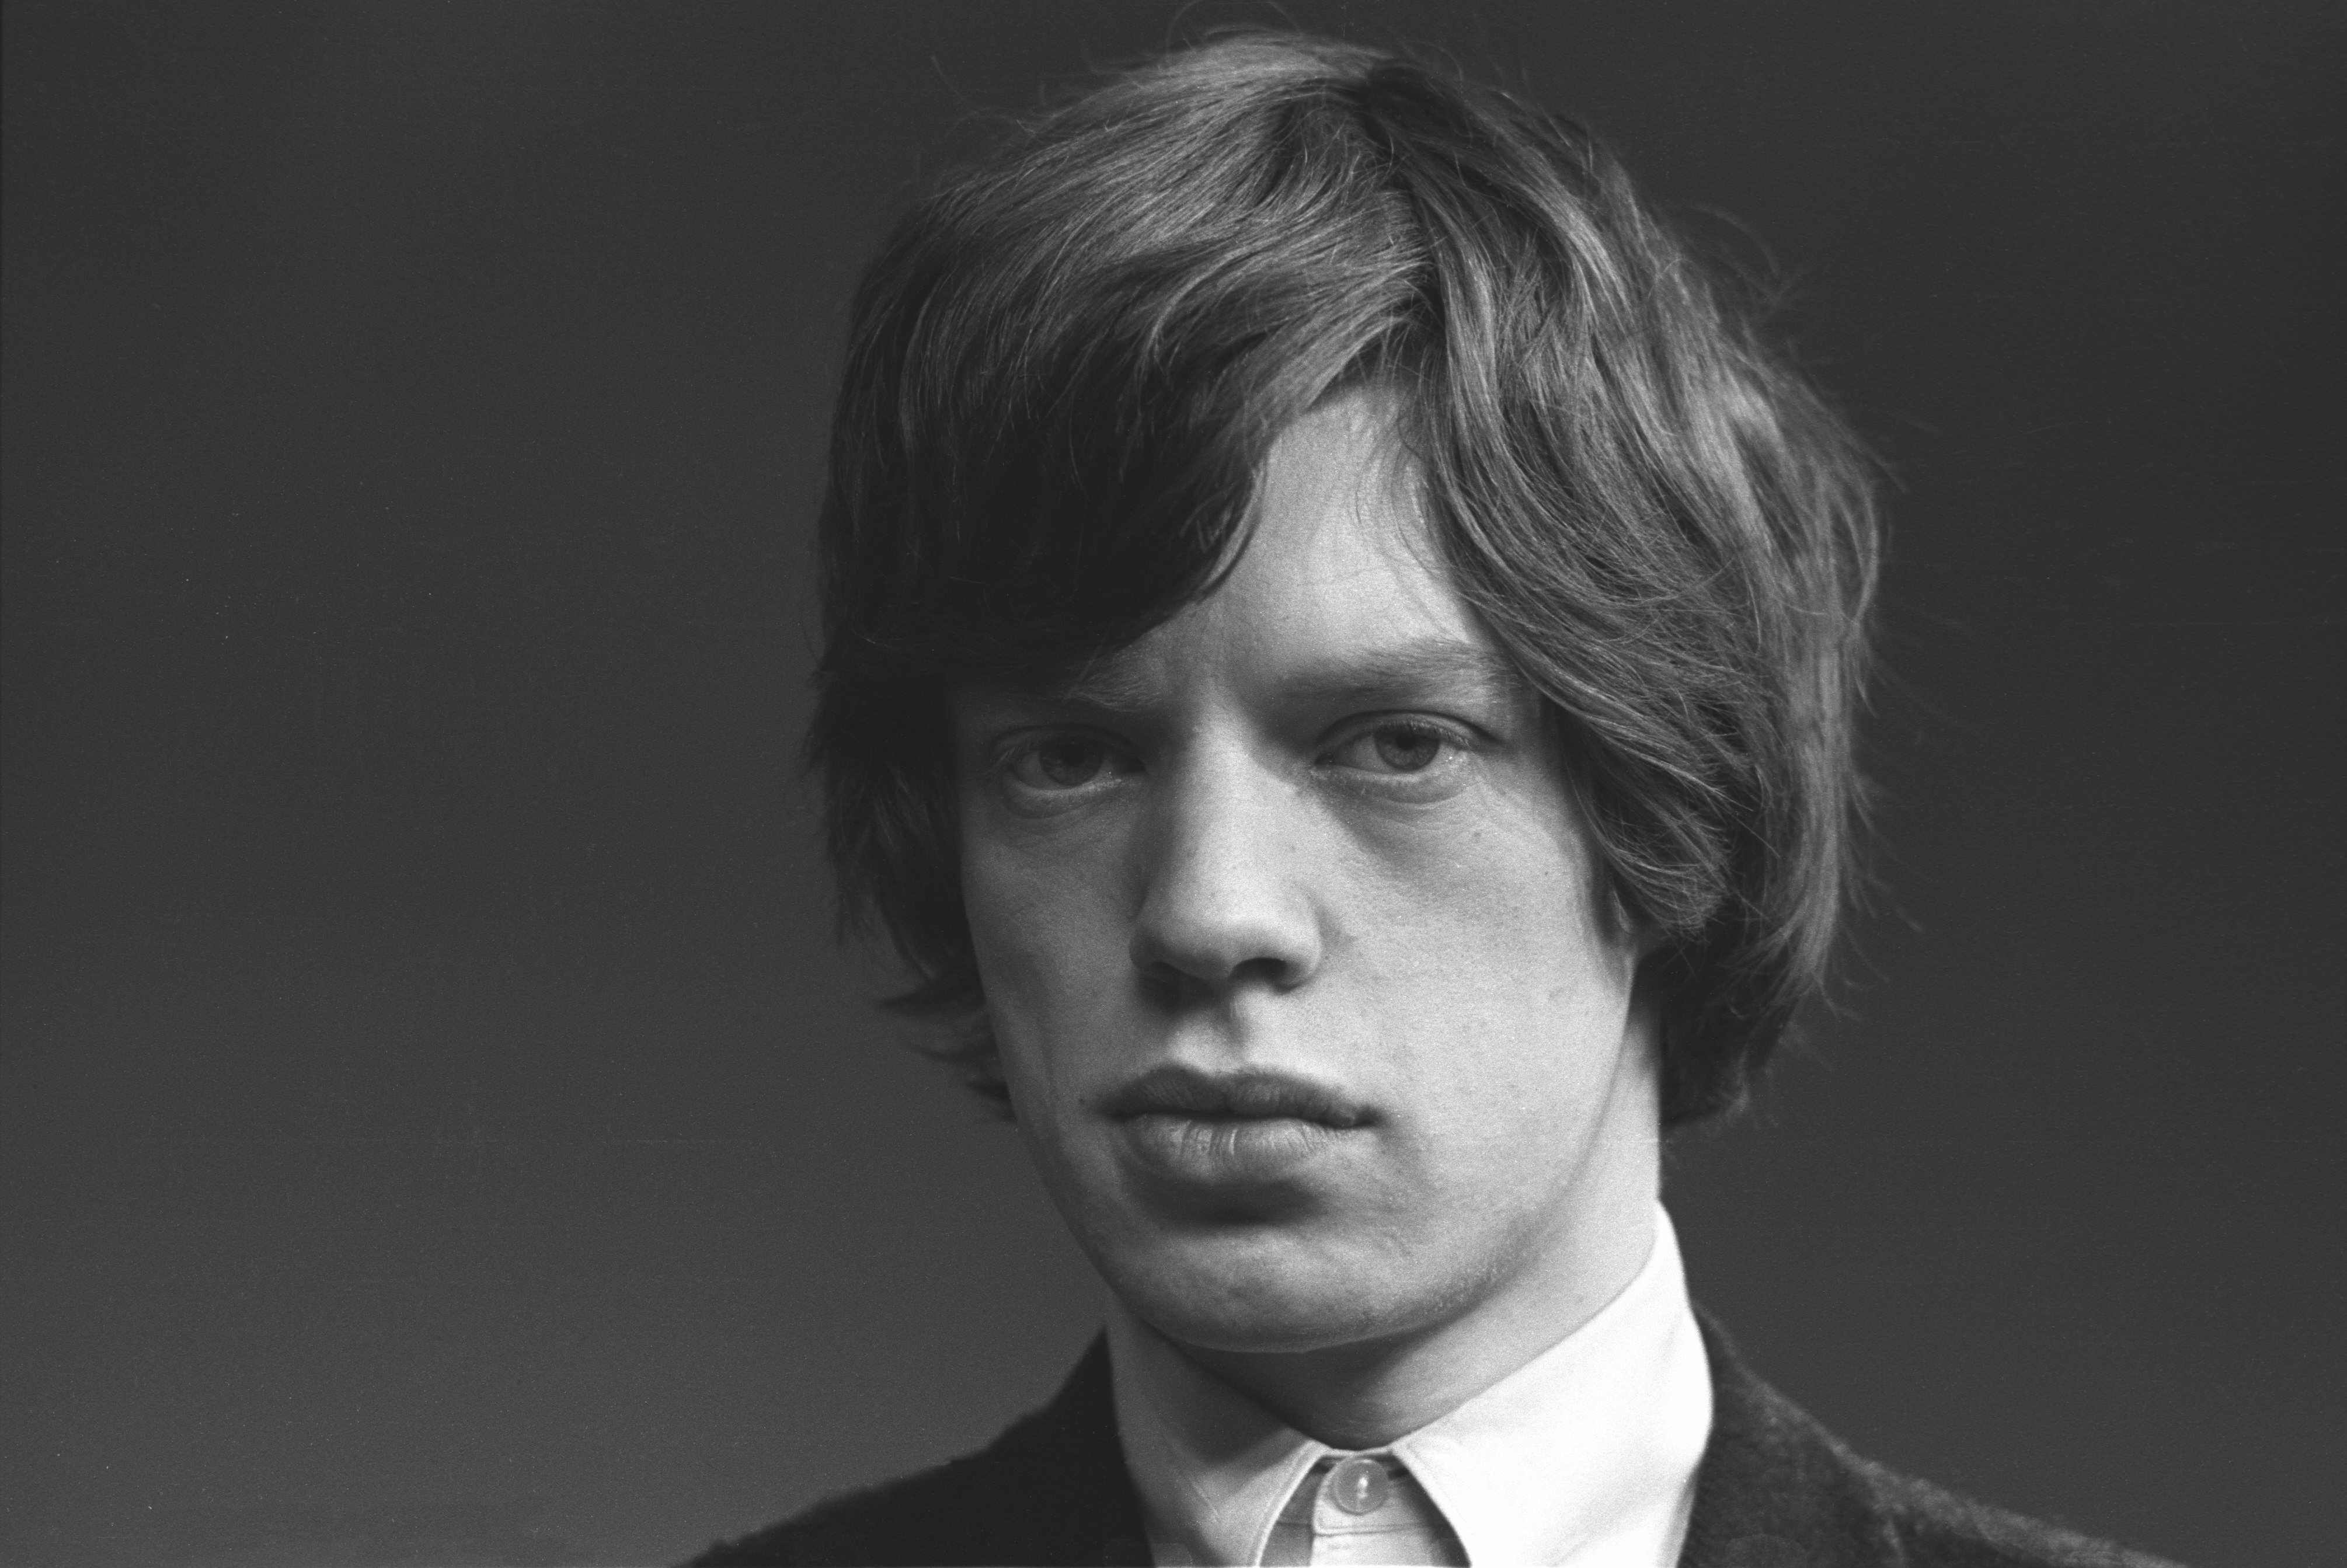 Mick Jagger with a mop top